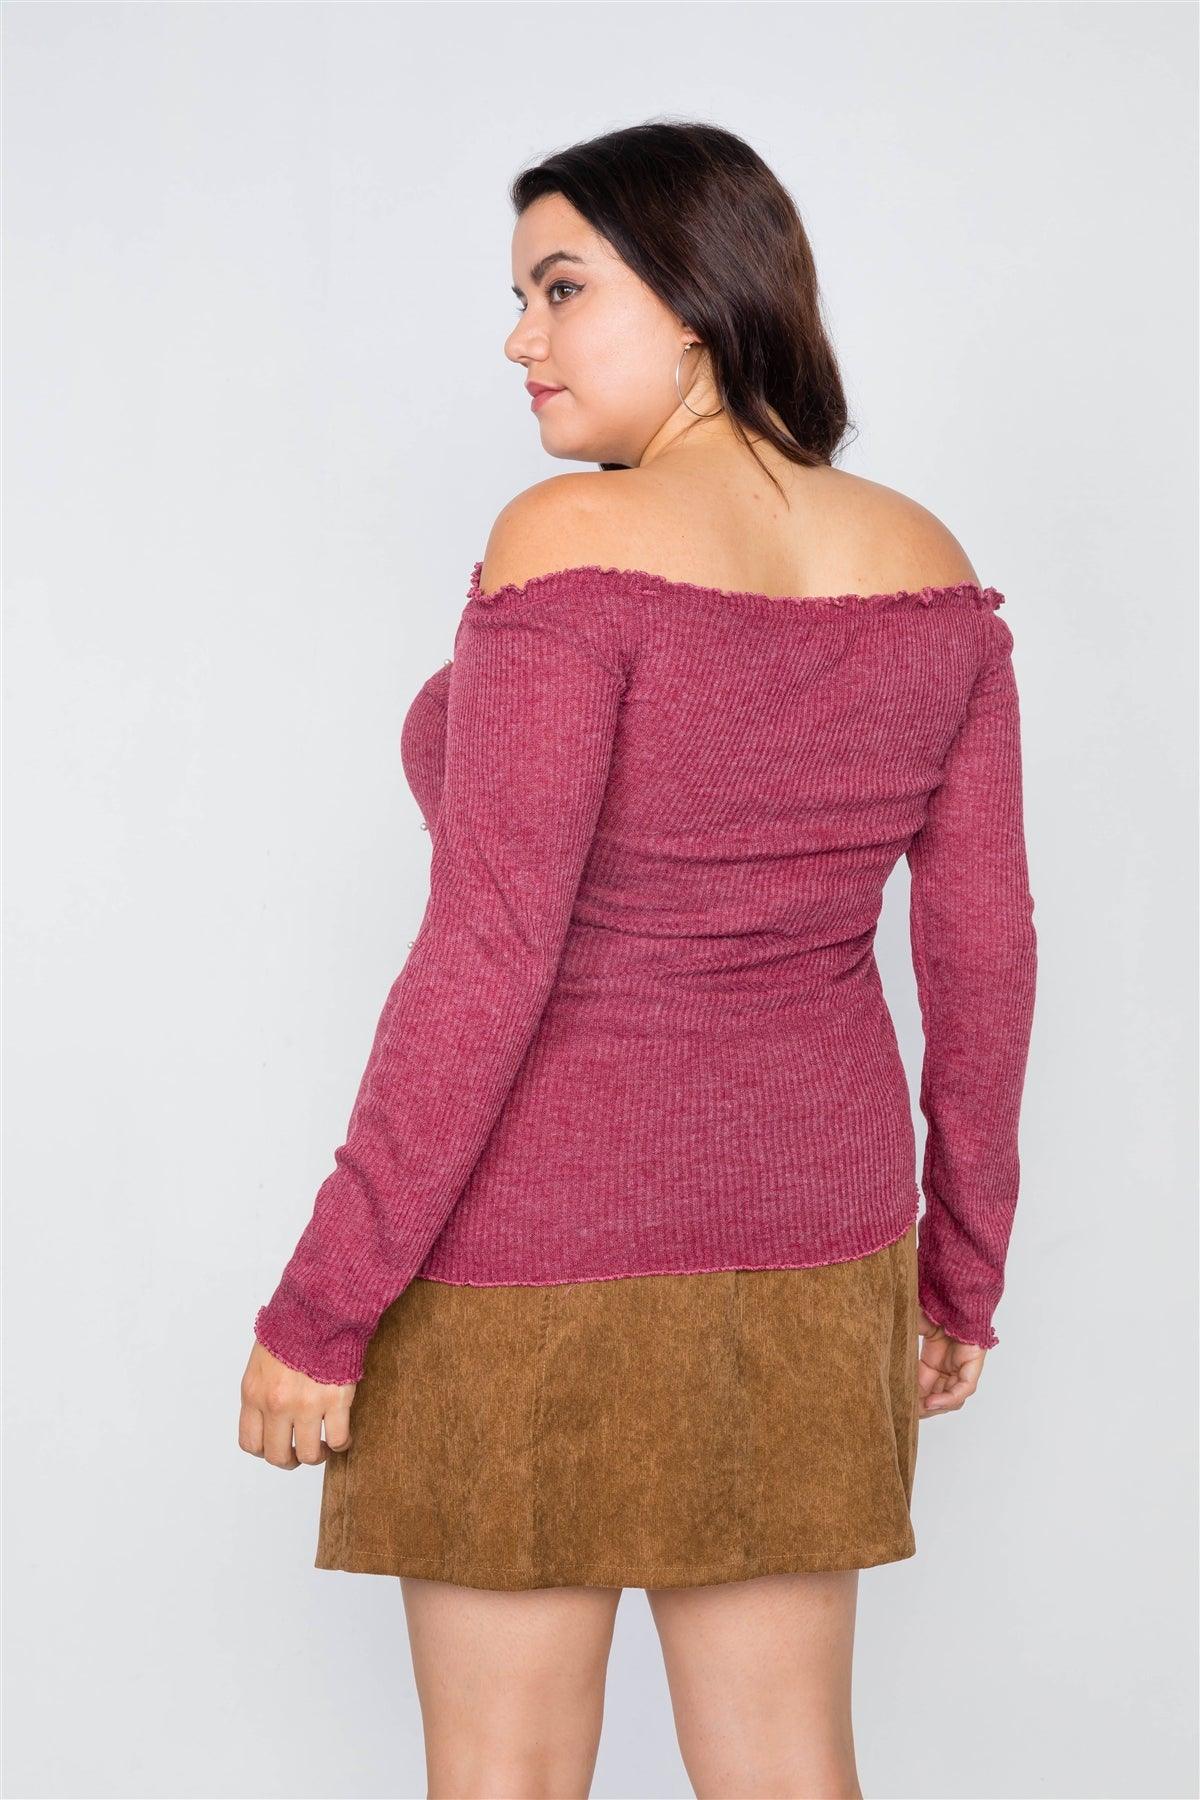 Junior Plus Size Wine & Pearl Ribbed Scallop Hem Off-The-Shoulder Top